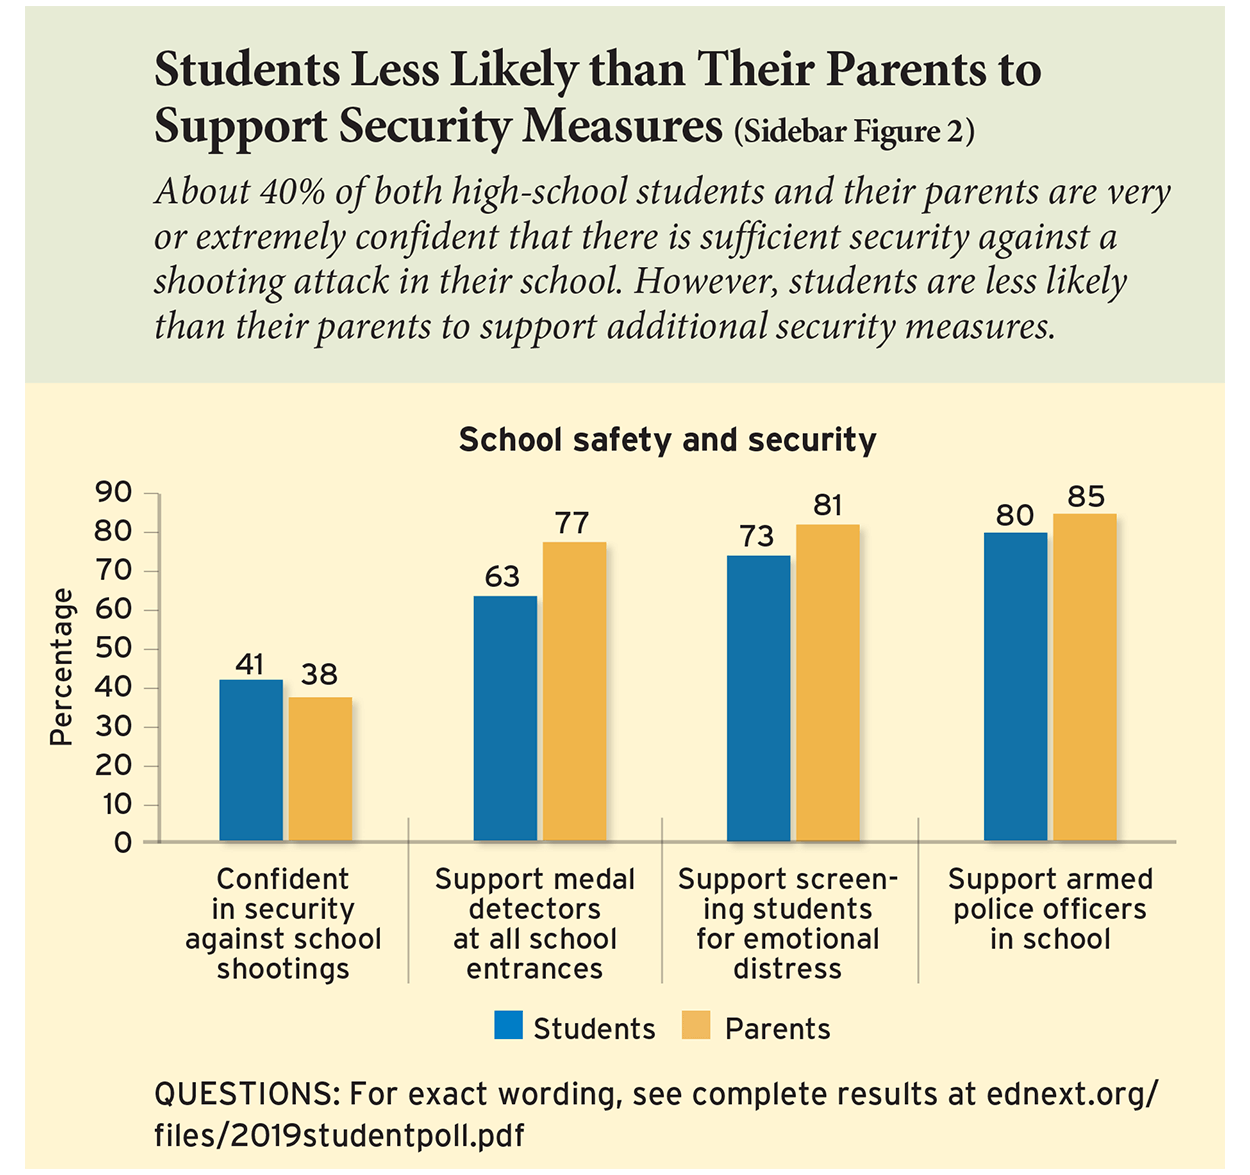 Students Less Likely than Their Parents to Support Security Measures (Sidebar Figure 2)